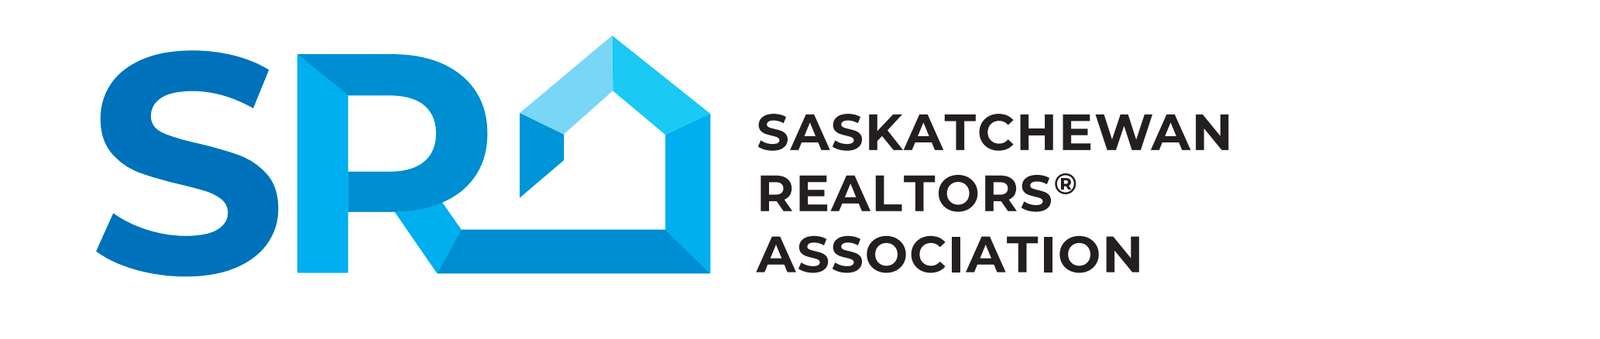 Saskatoon home sales show significant improvements from April to May 2020